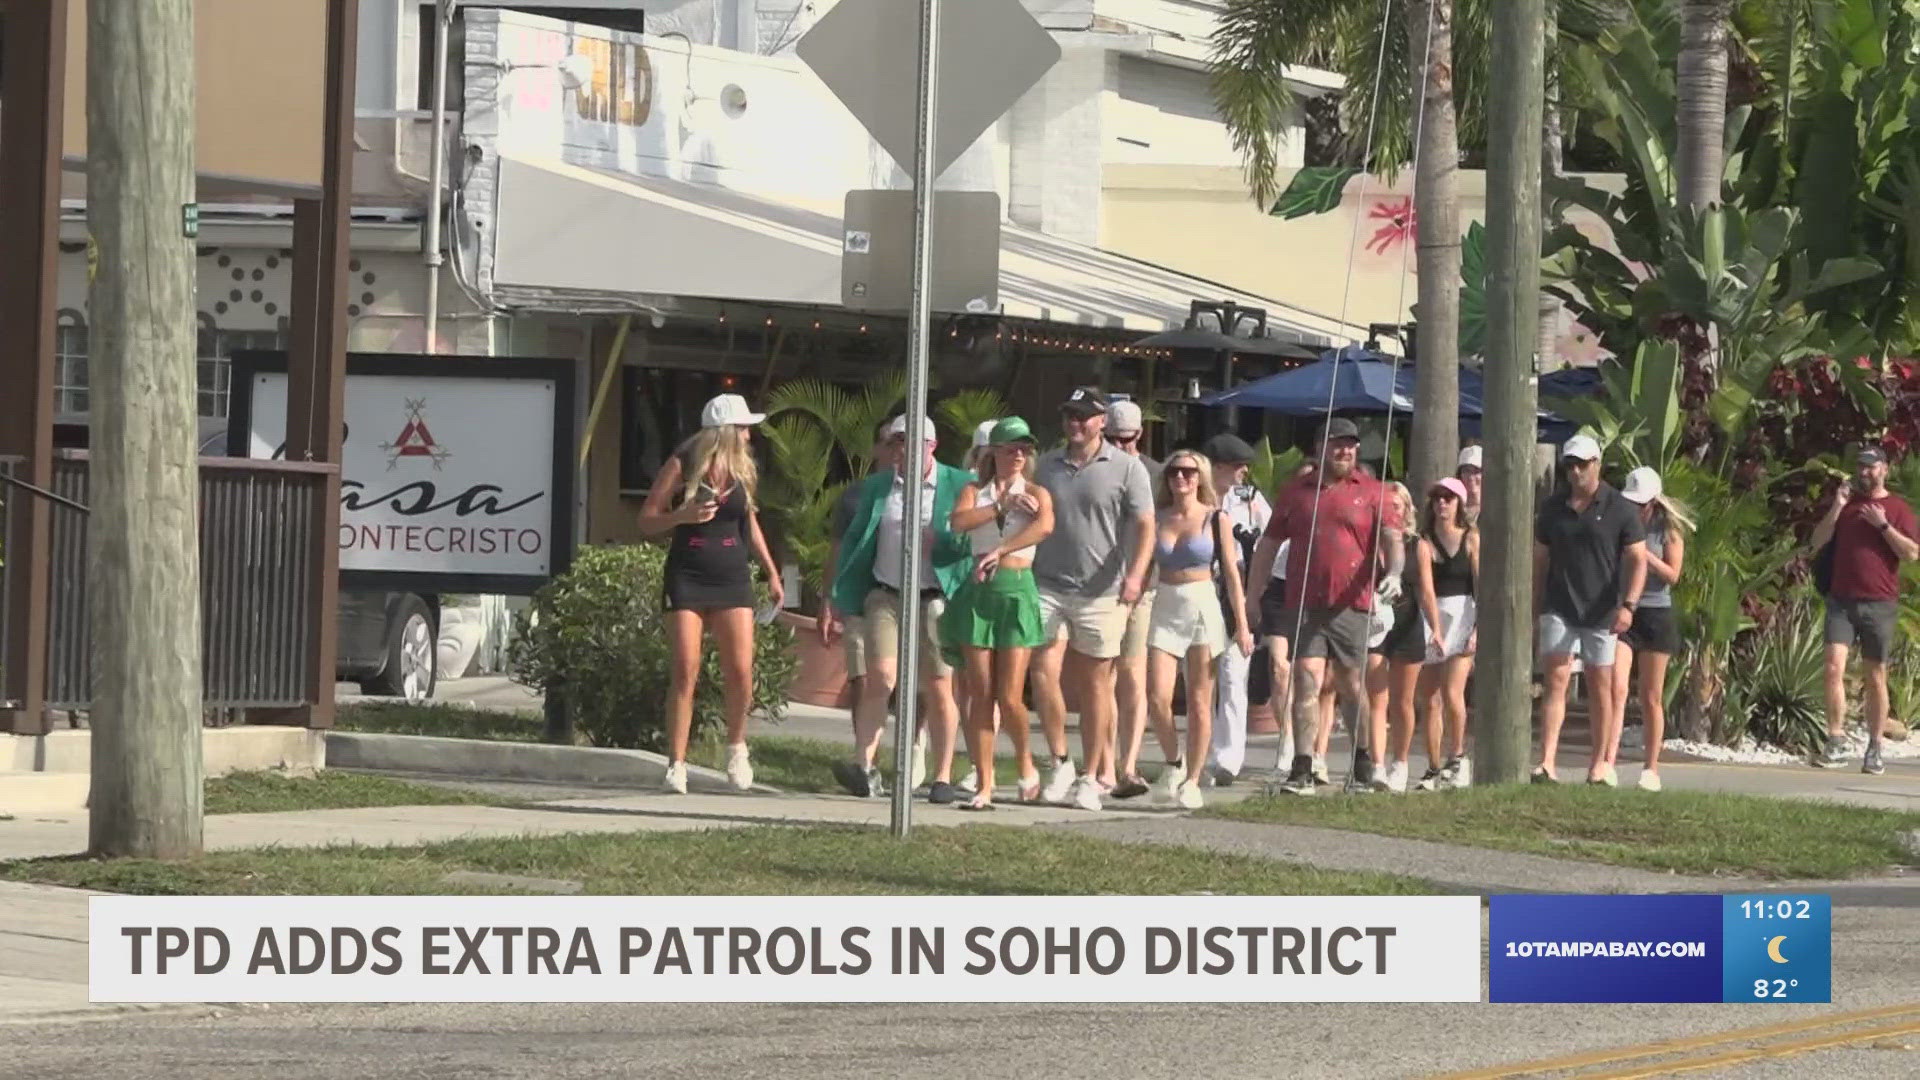 The Tampa Police Department is increasing patrols in the SoHo district following shootings in the area.